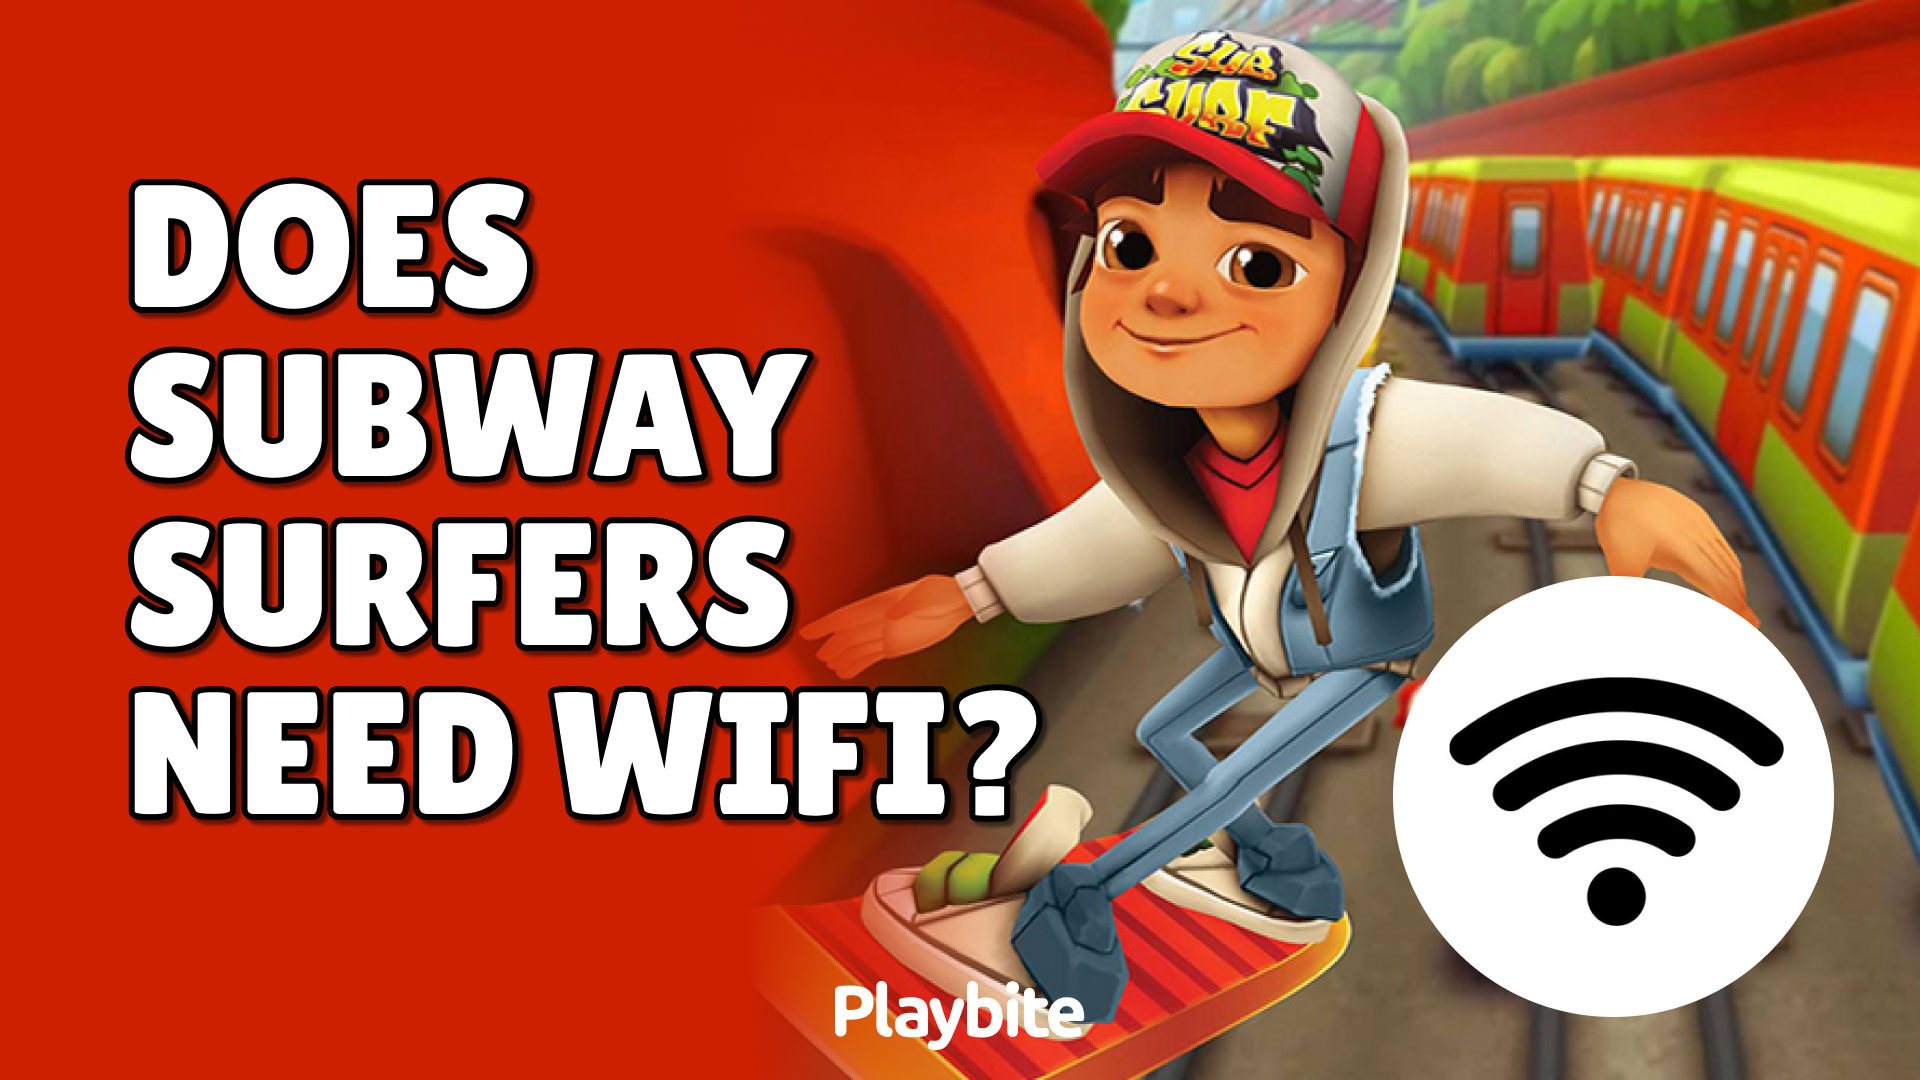 What Is The World Record For Subway Surfers? - Playbite